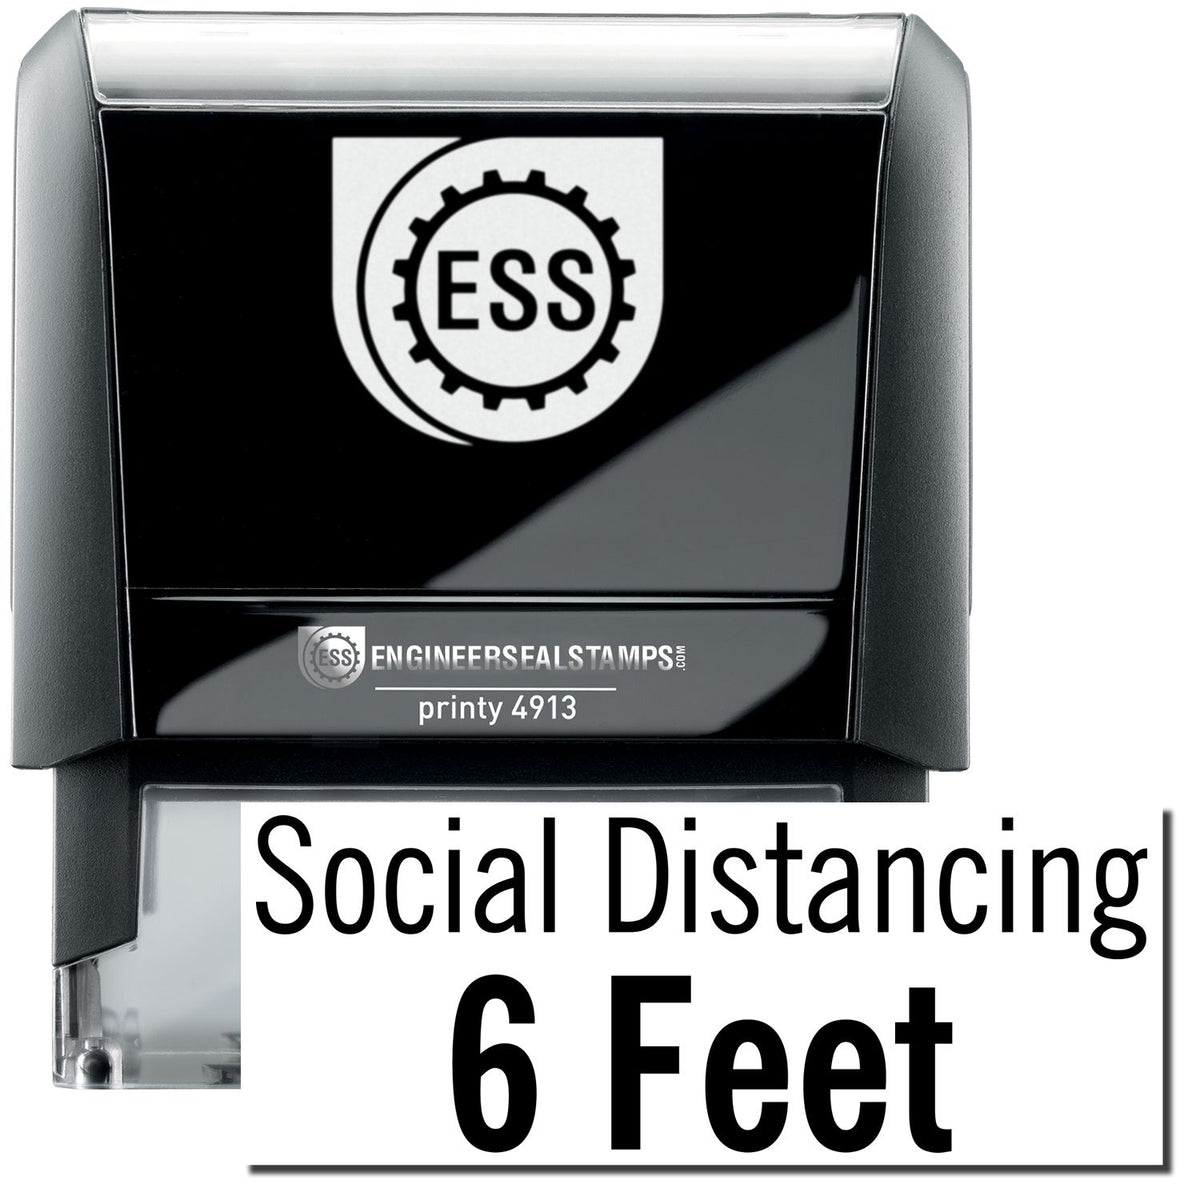 A self-inking stamp with a stamped image showing how the text &quot;Social Distancing 6 Feet&quot; in a large font is displayed by it after stamping.